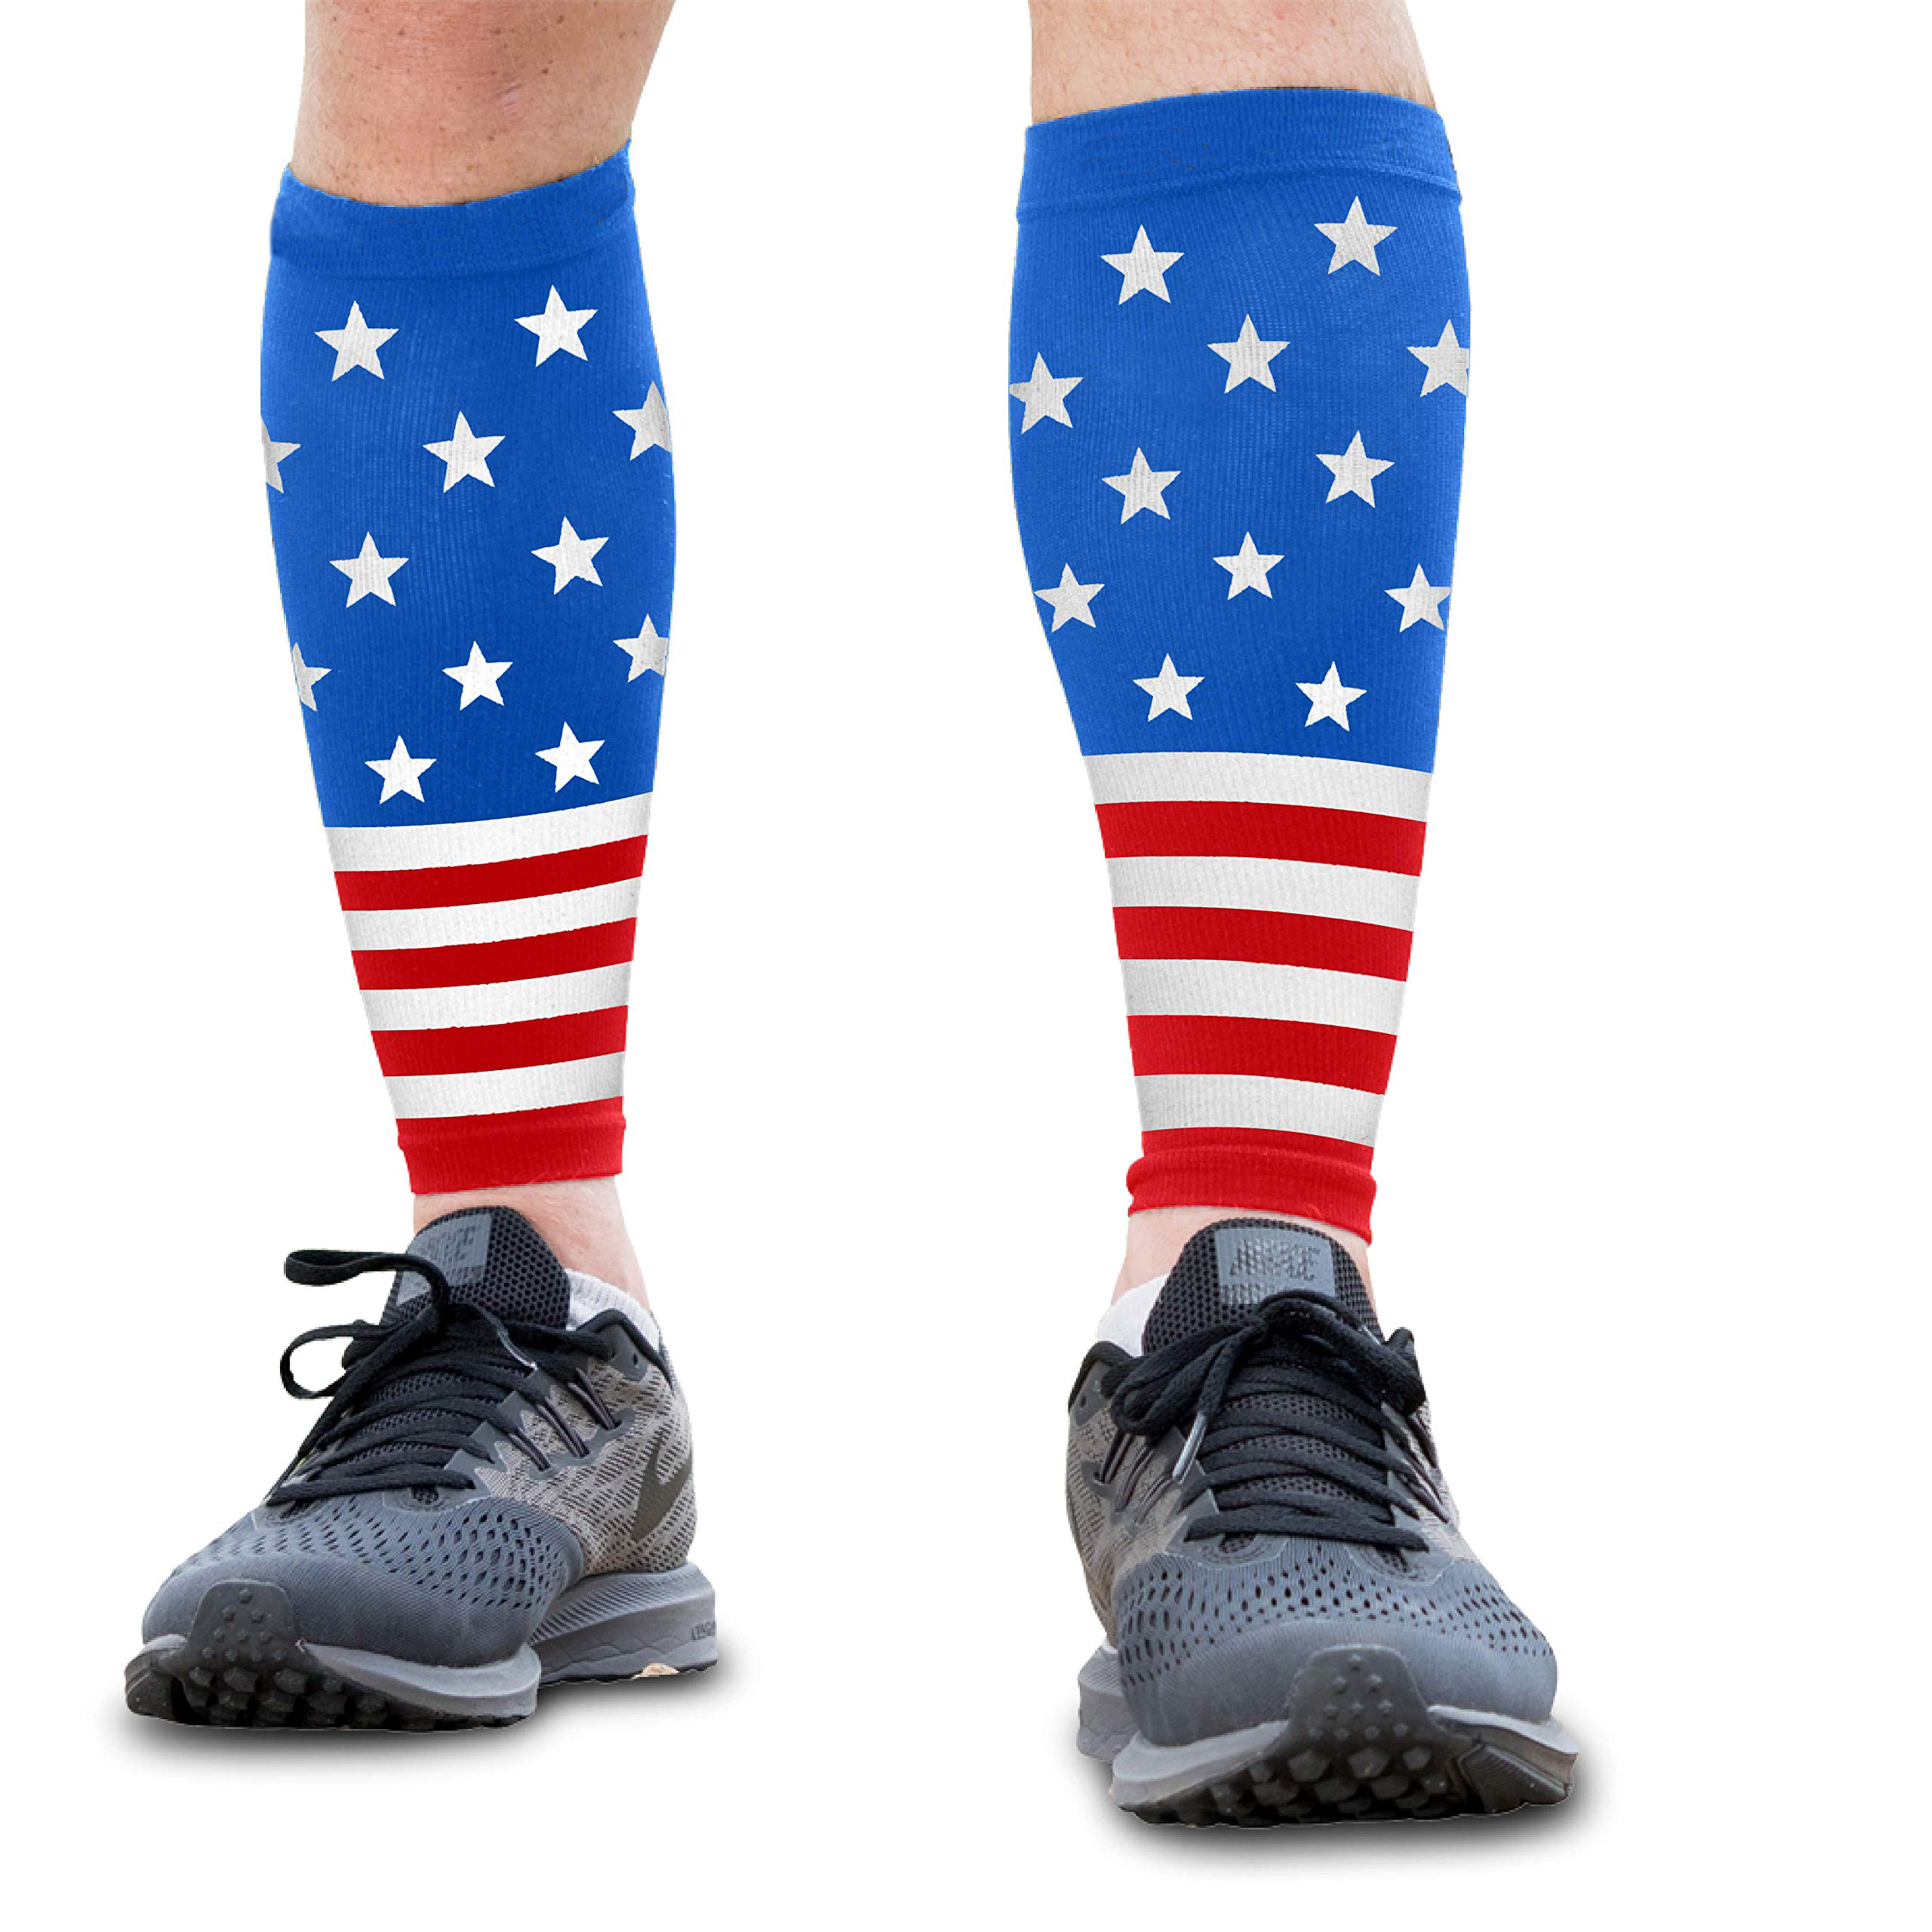 Wholesale Calf Compression Sleeves – Leg Compression Socks for Runners,  Shin Splint, Varicose Vein & Calf Pain Relief manufacturers and suppliers